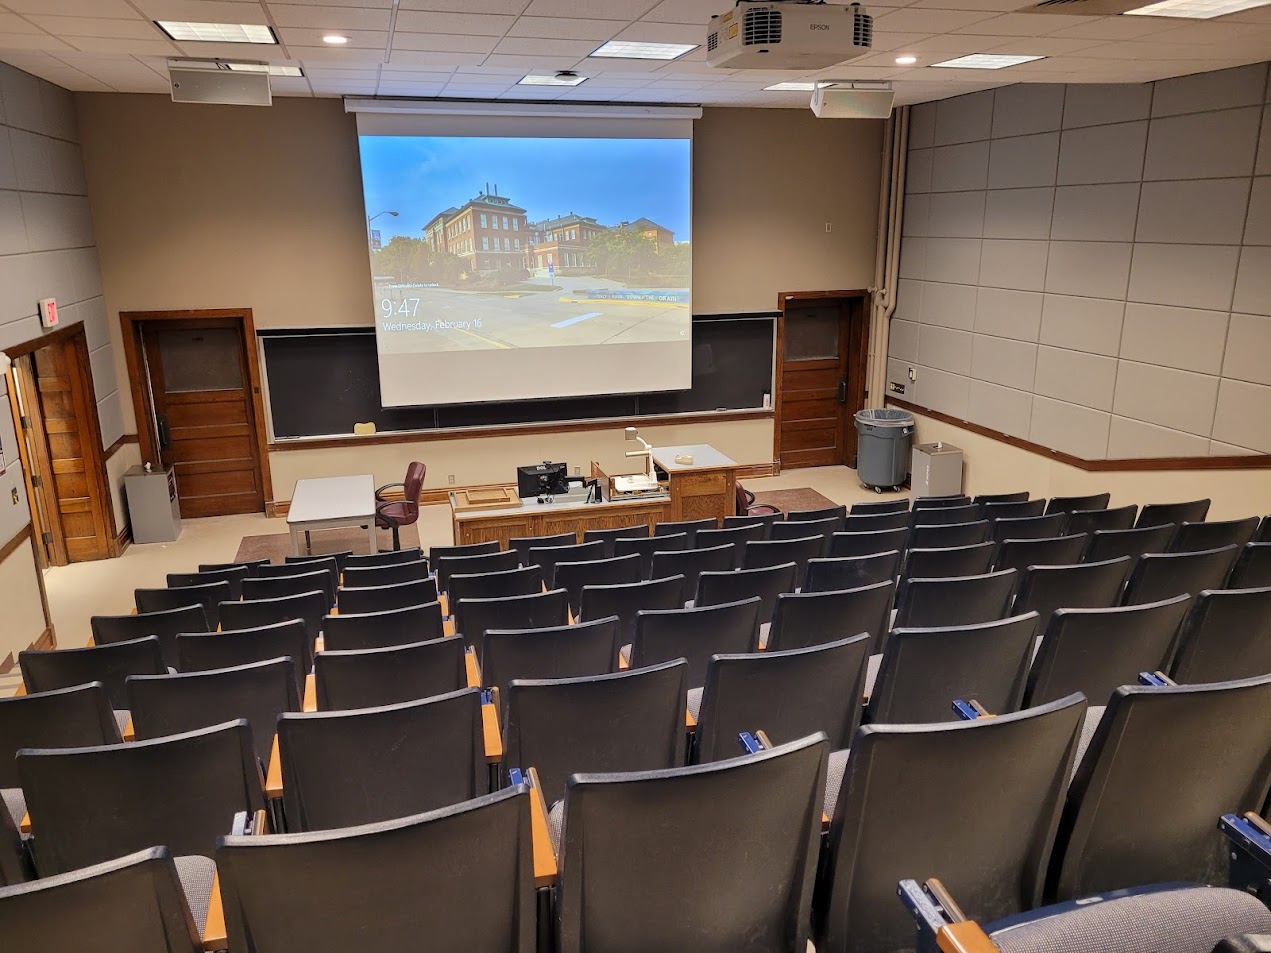 A view of the classroom with theater auditorium seating, chalkboard, and instructor table in front.